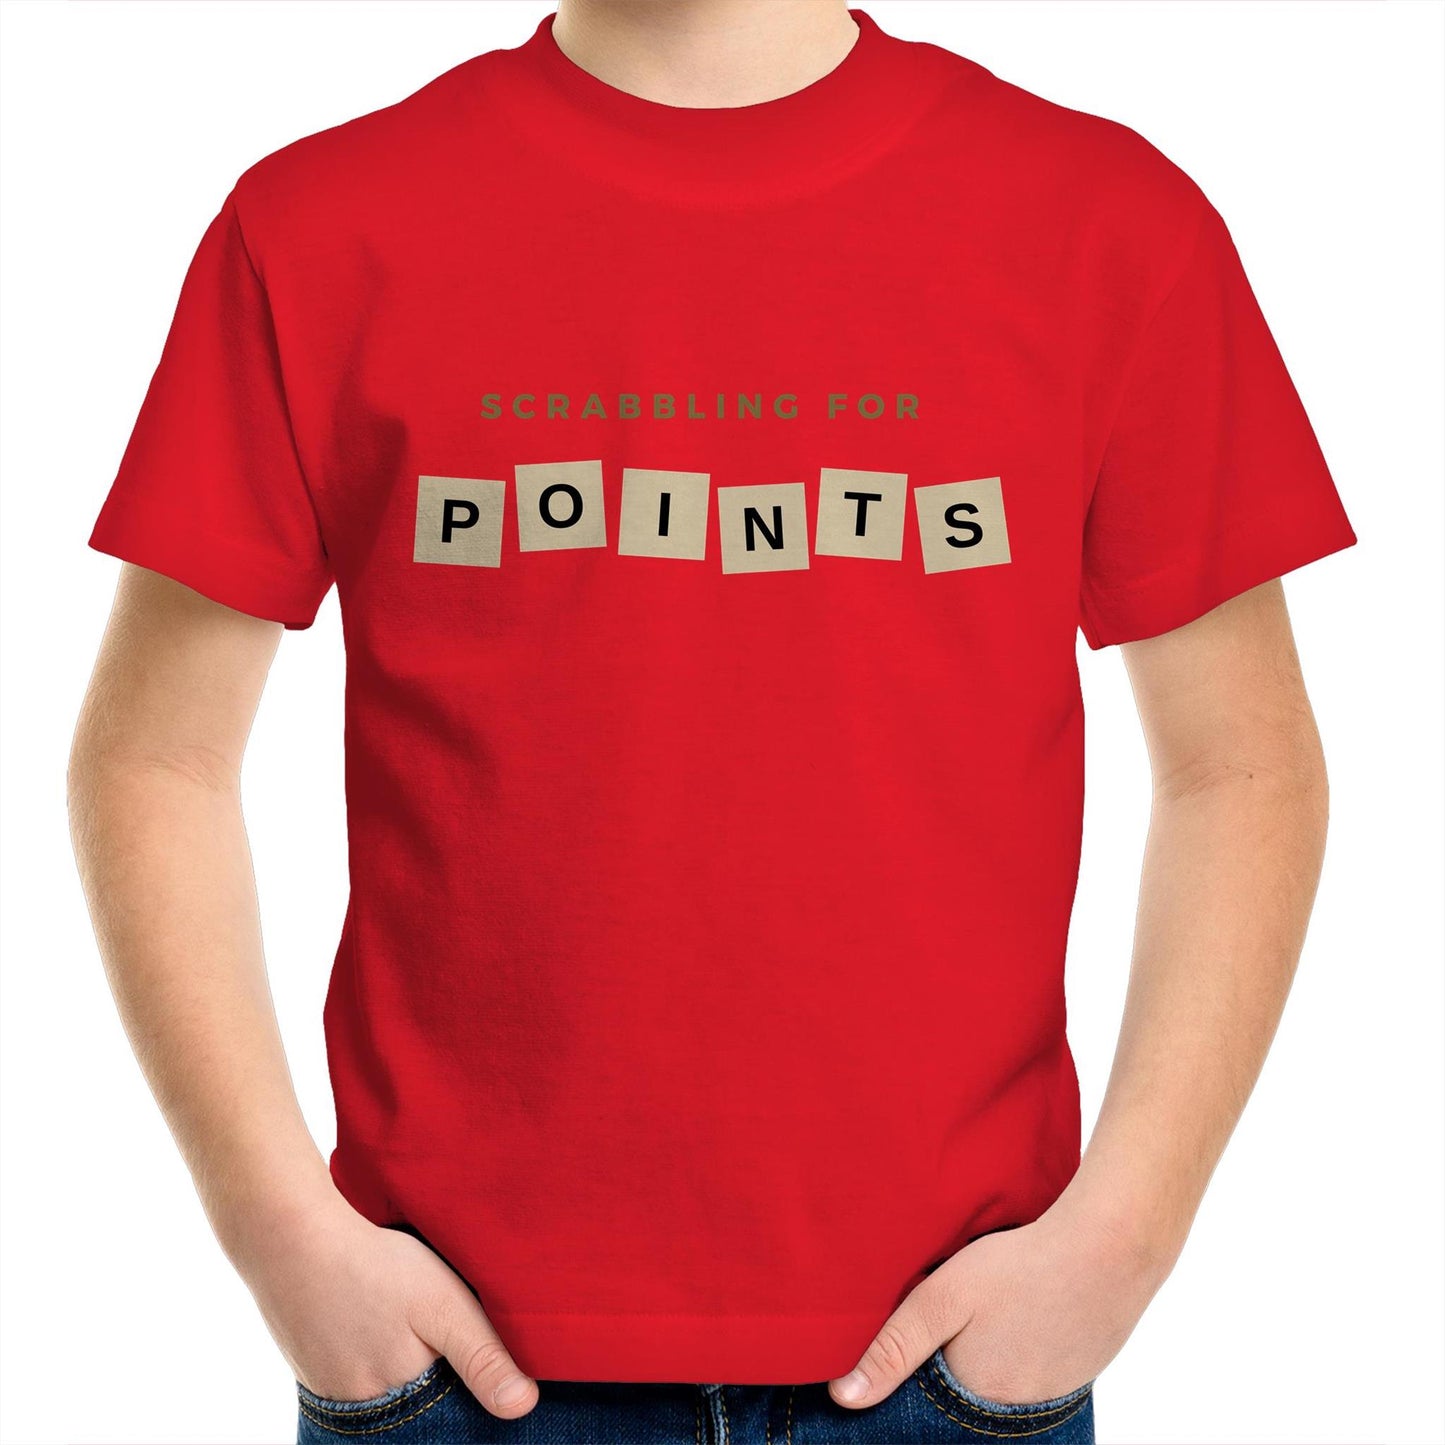 Scrabbling For Points - Kids Youth Crew T-Shirt Red Kids Youth T-shirt Games